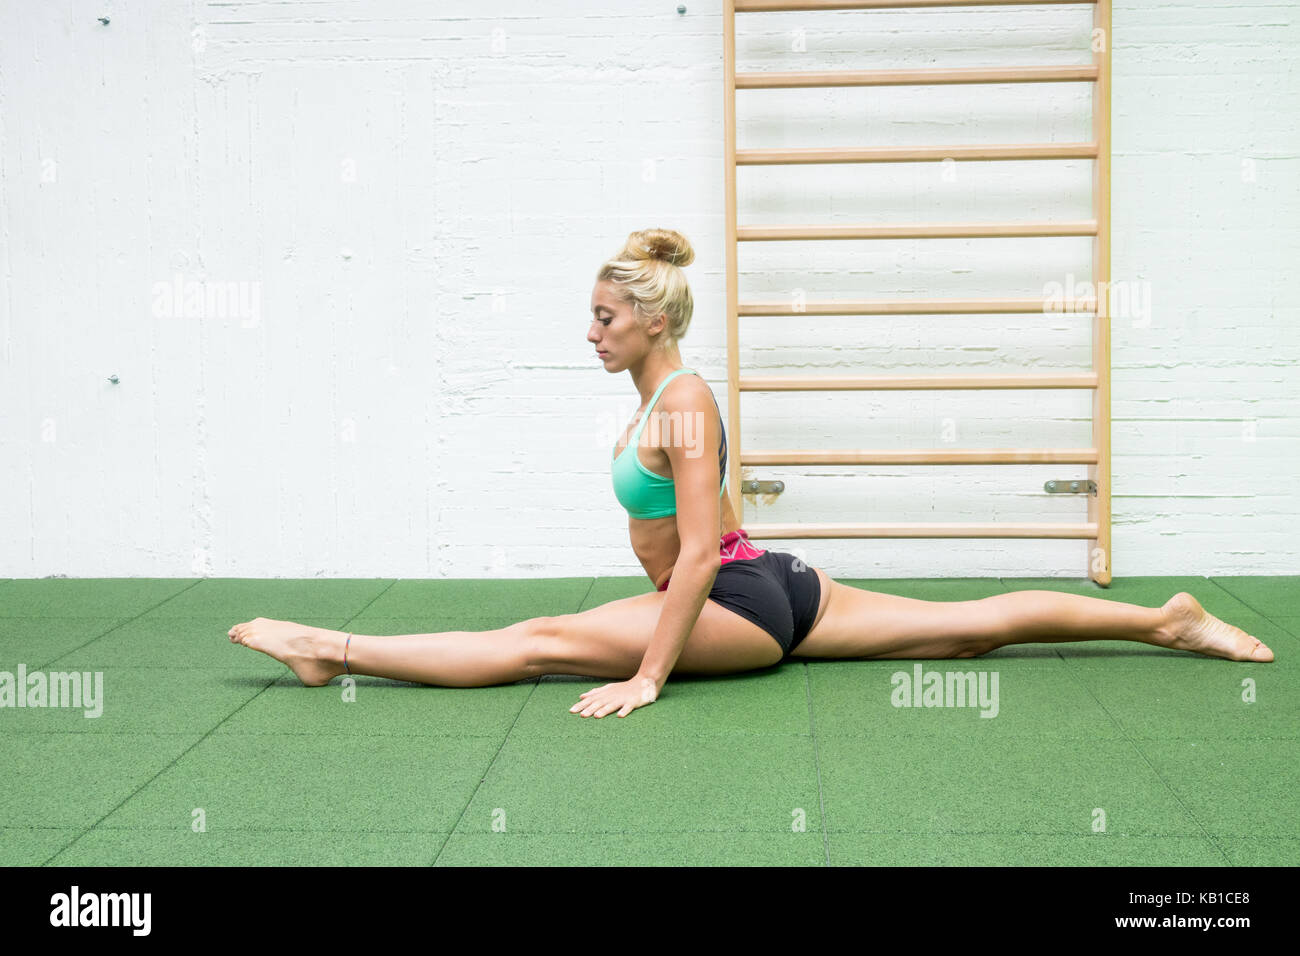 Fitness girl stretching legs doing pilates leg stretches exercises in gym.  athlete exercising abductor hip flexor muscle Stock Photo - Alamy